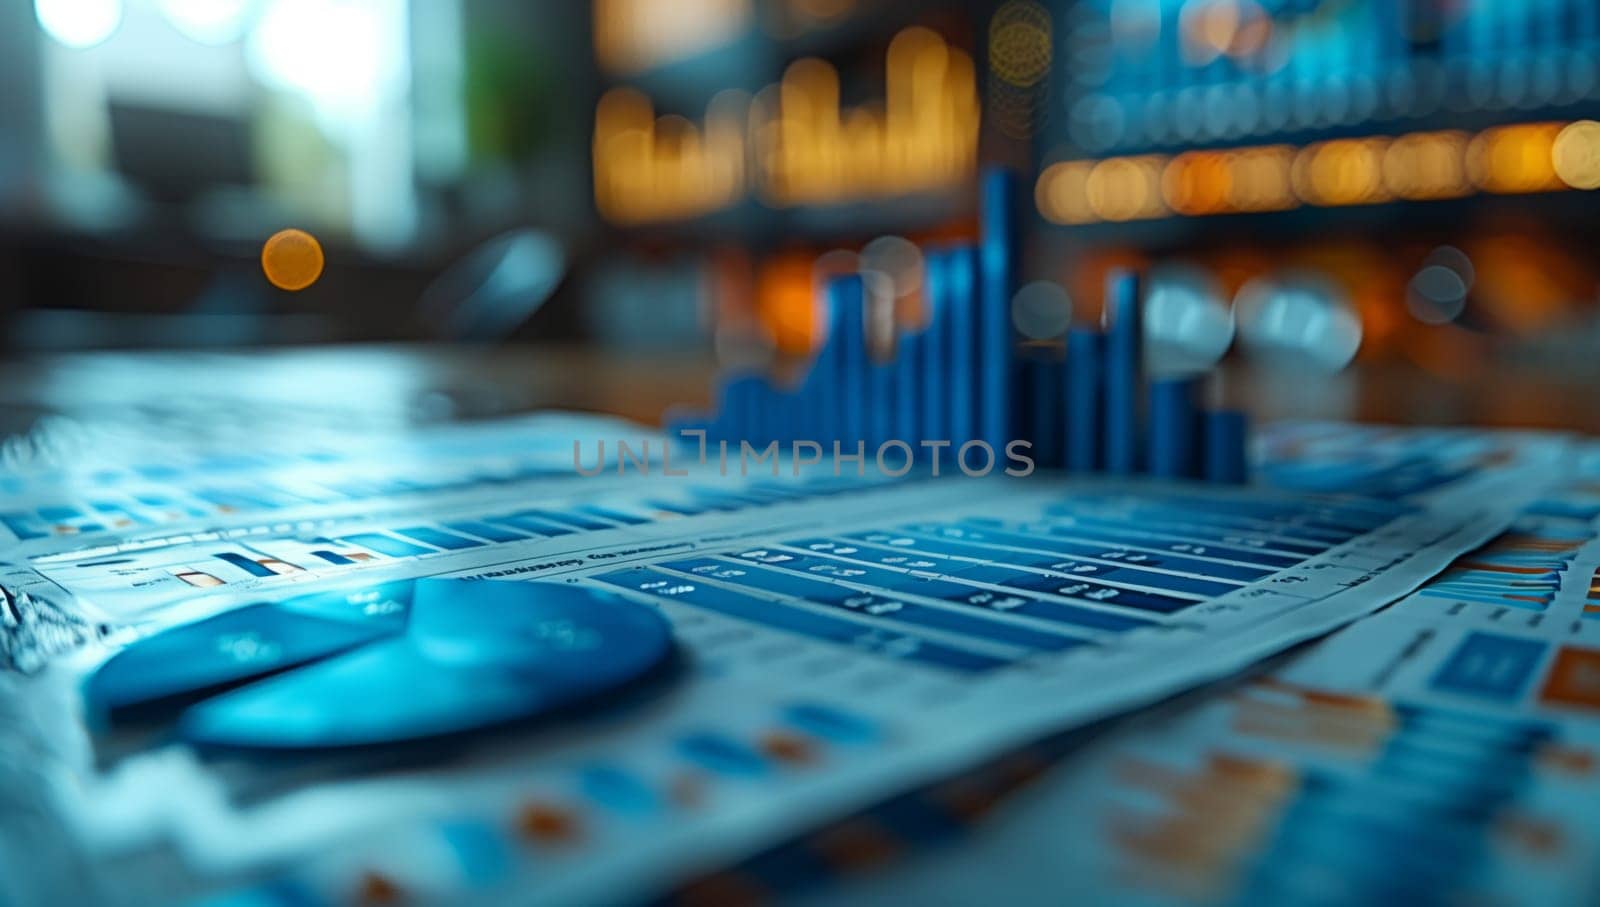 Closeup of charts and graphs on table in office with engineering equipment by richwolf